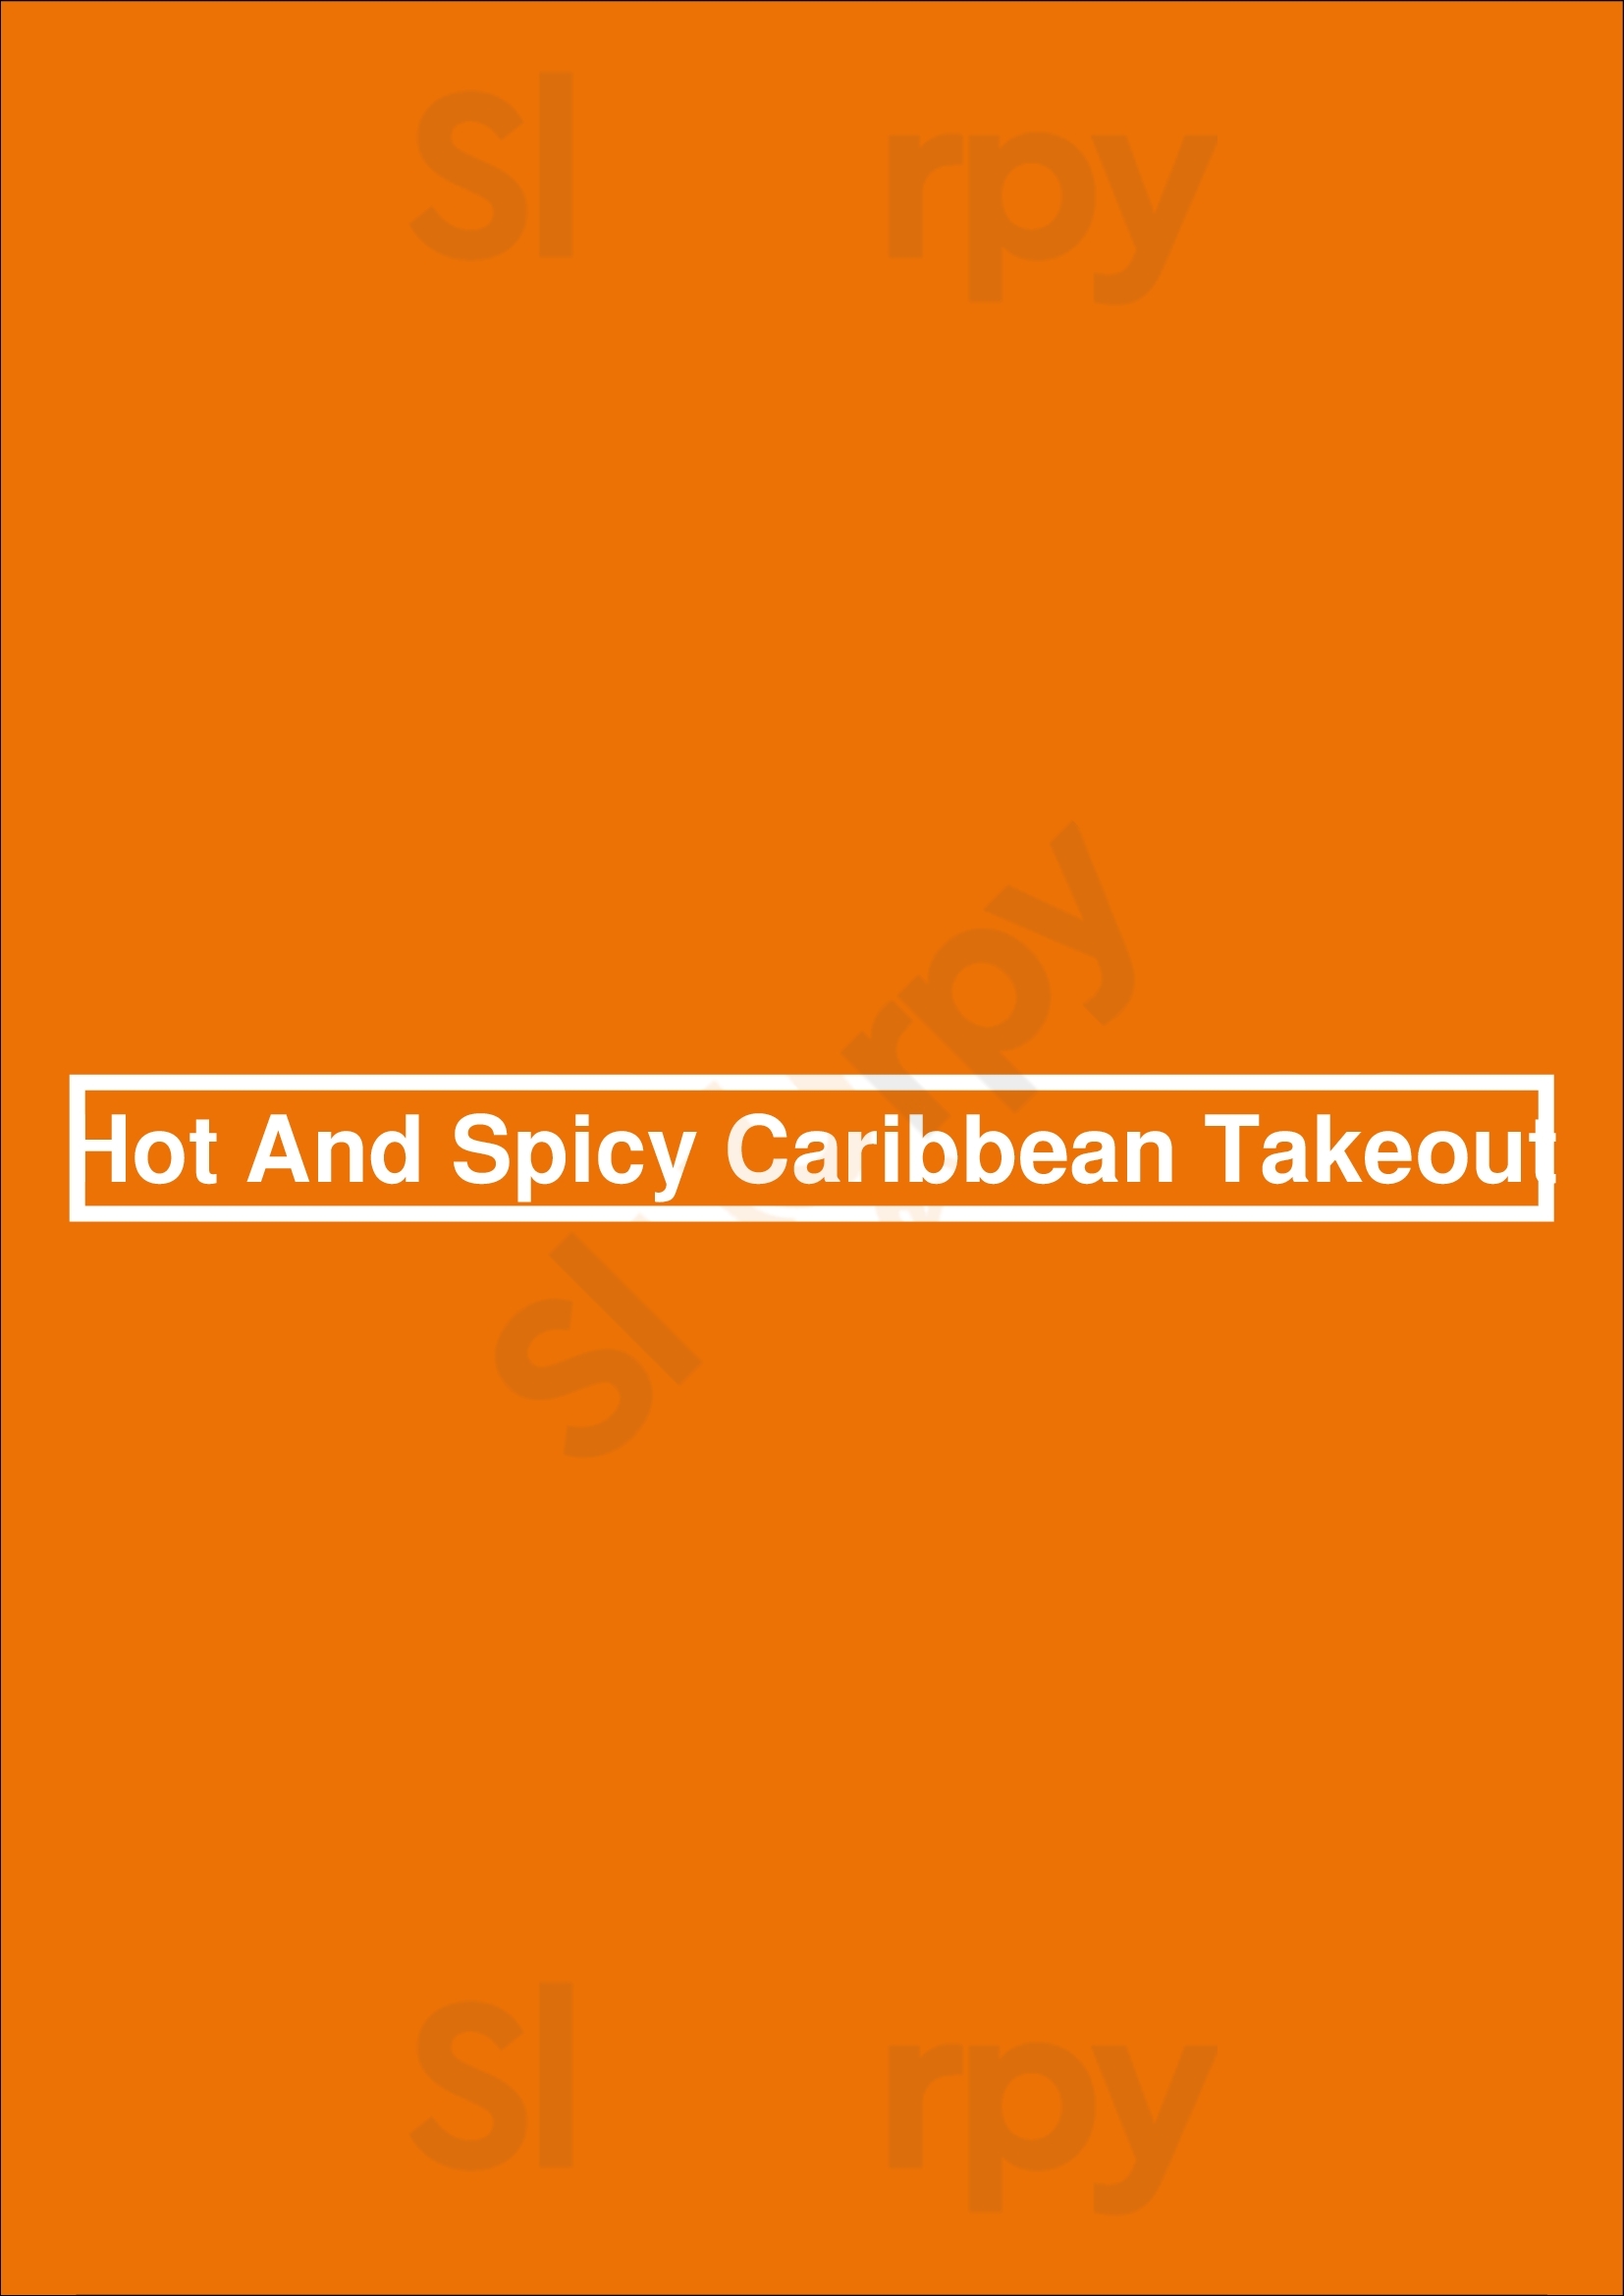 Hot And Spicy Caribbean Takeout Toronto Menu - 1